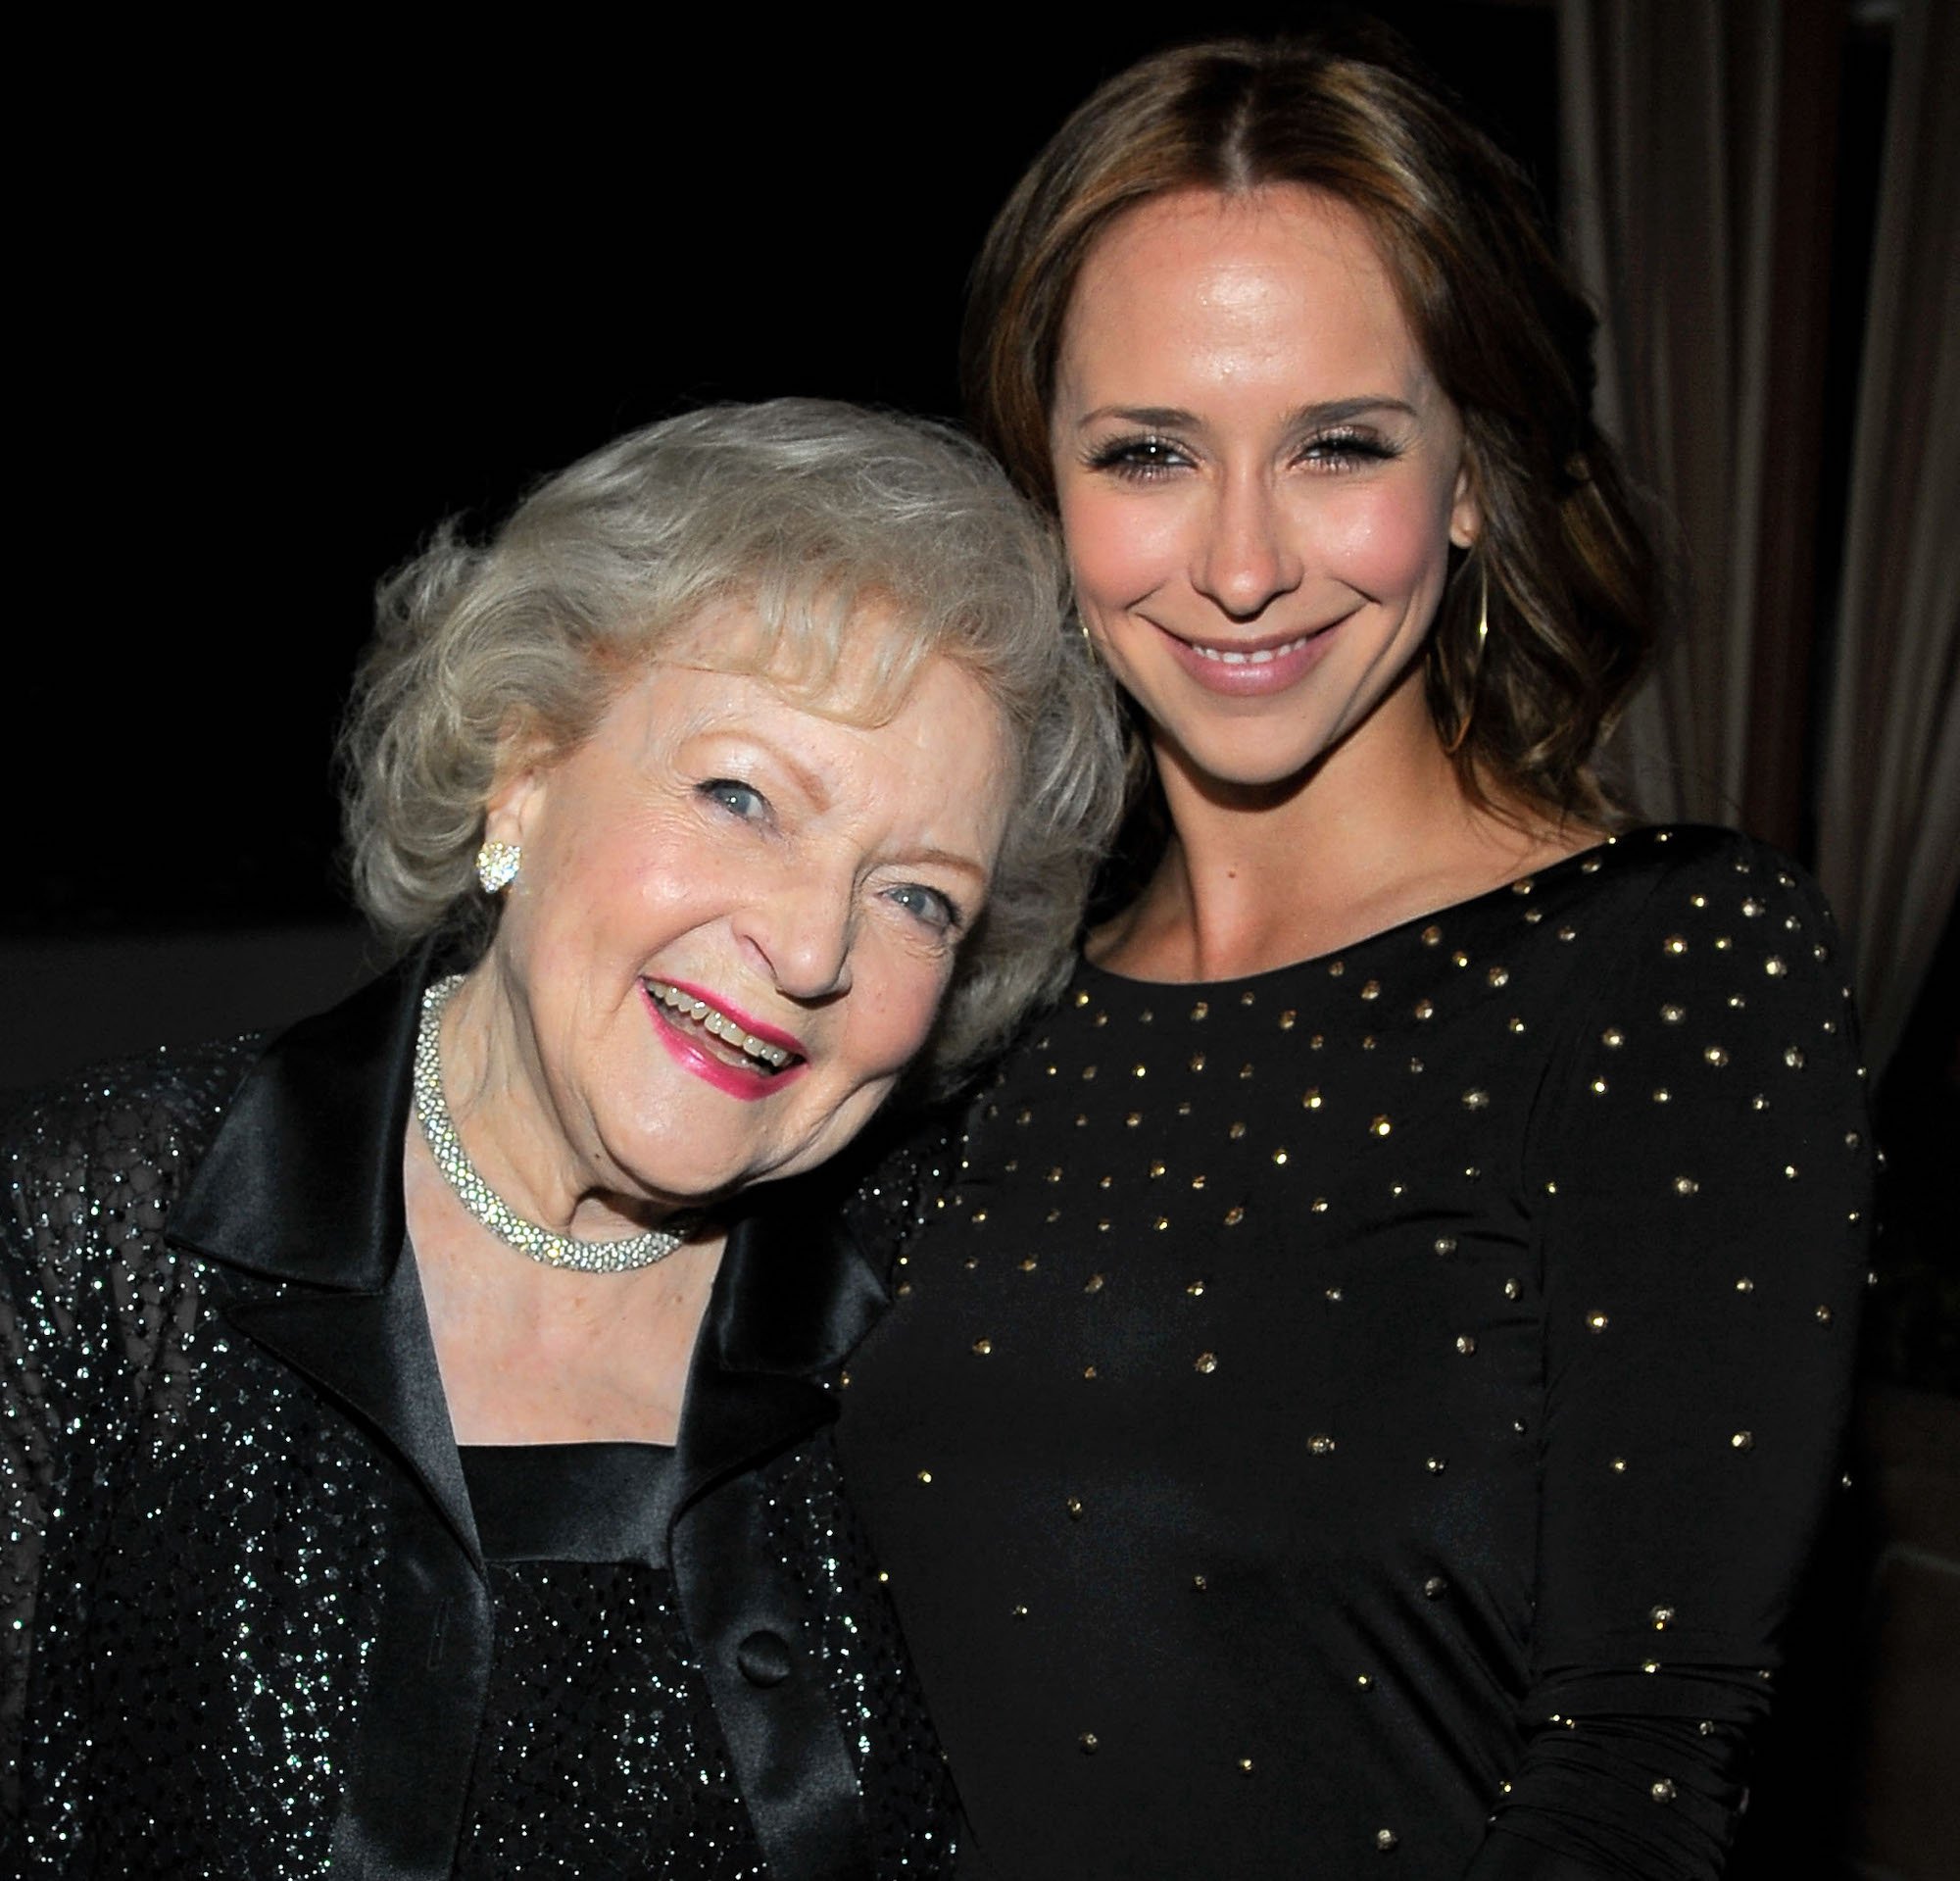 Betty White and Jennifer Love Hewitt at TV Land's "Hot In Cleveland" And "Retired At 35" Premiere Party in 2011